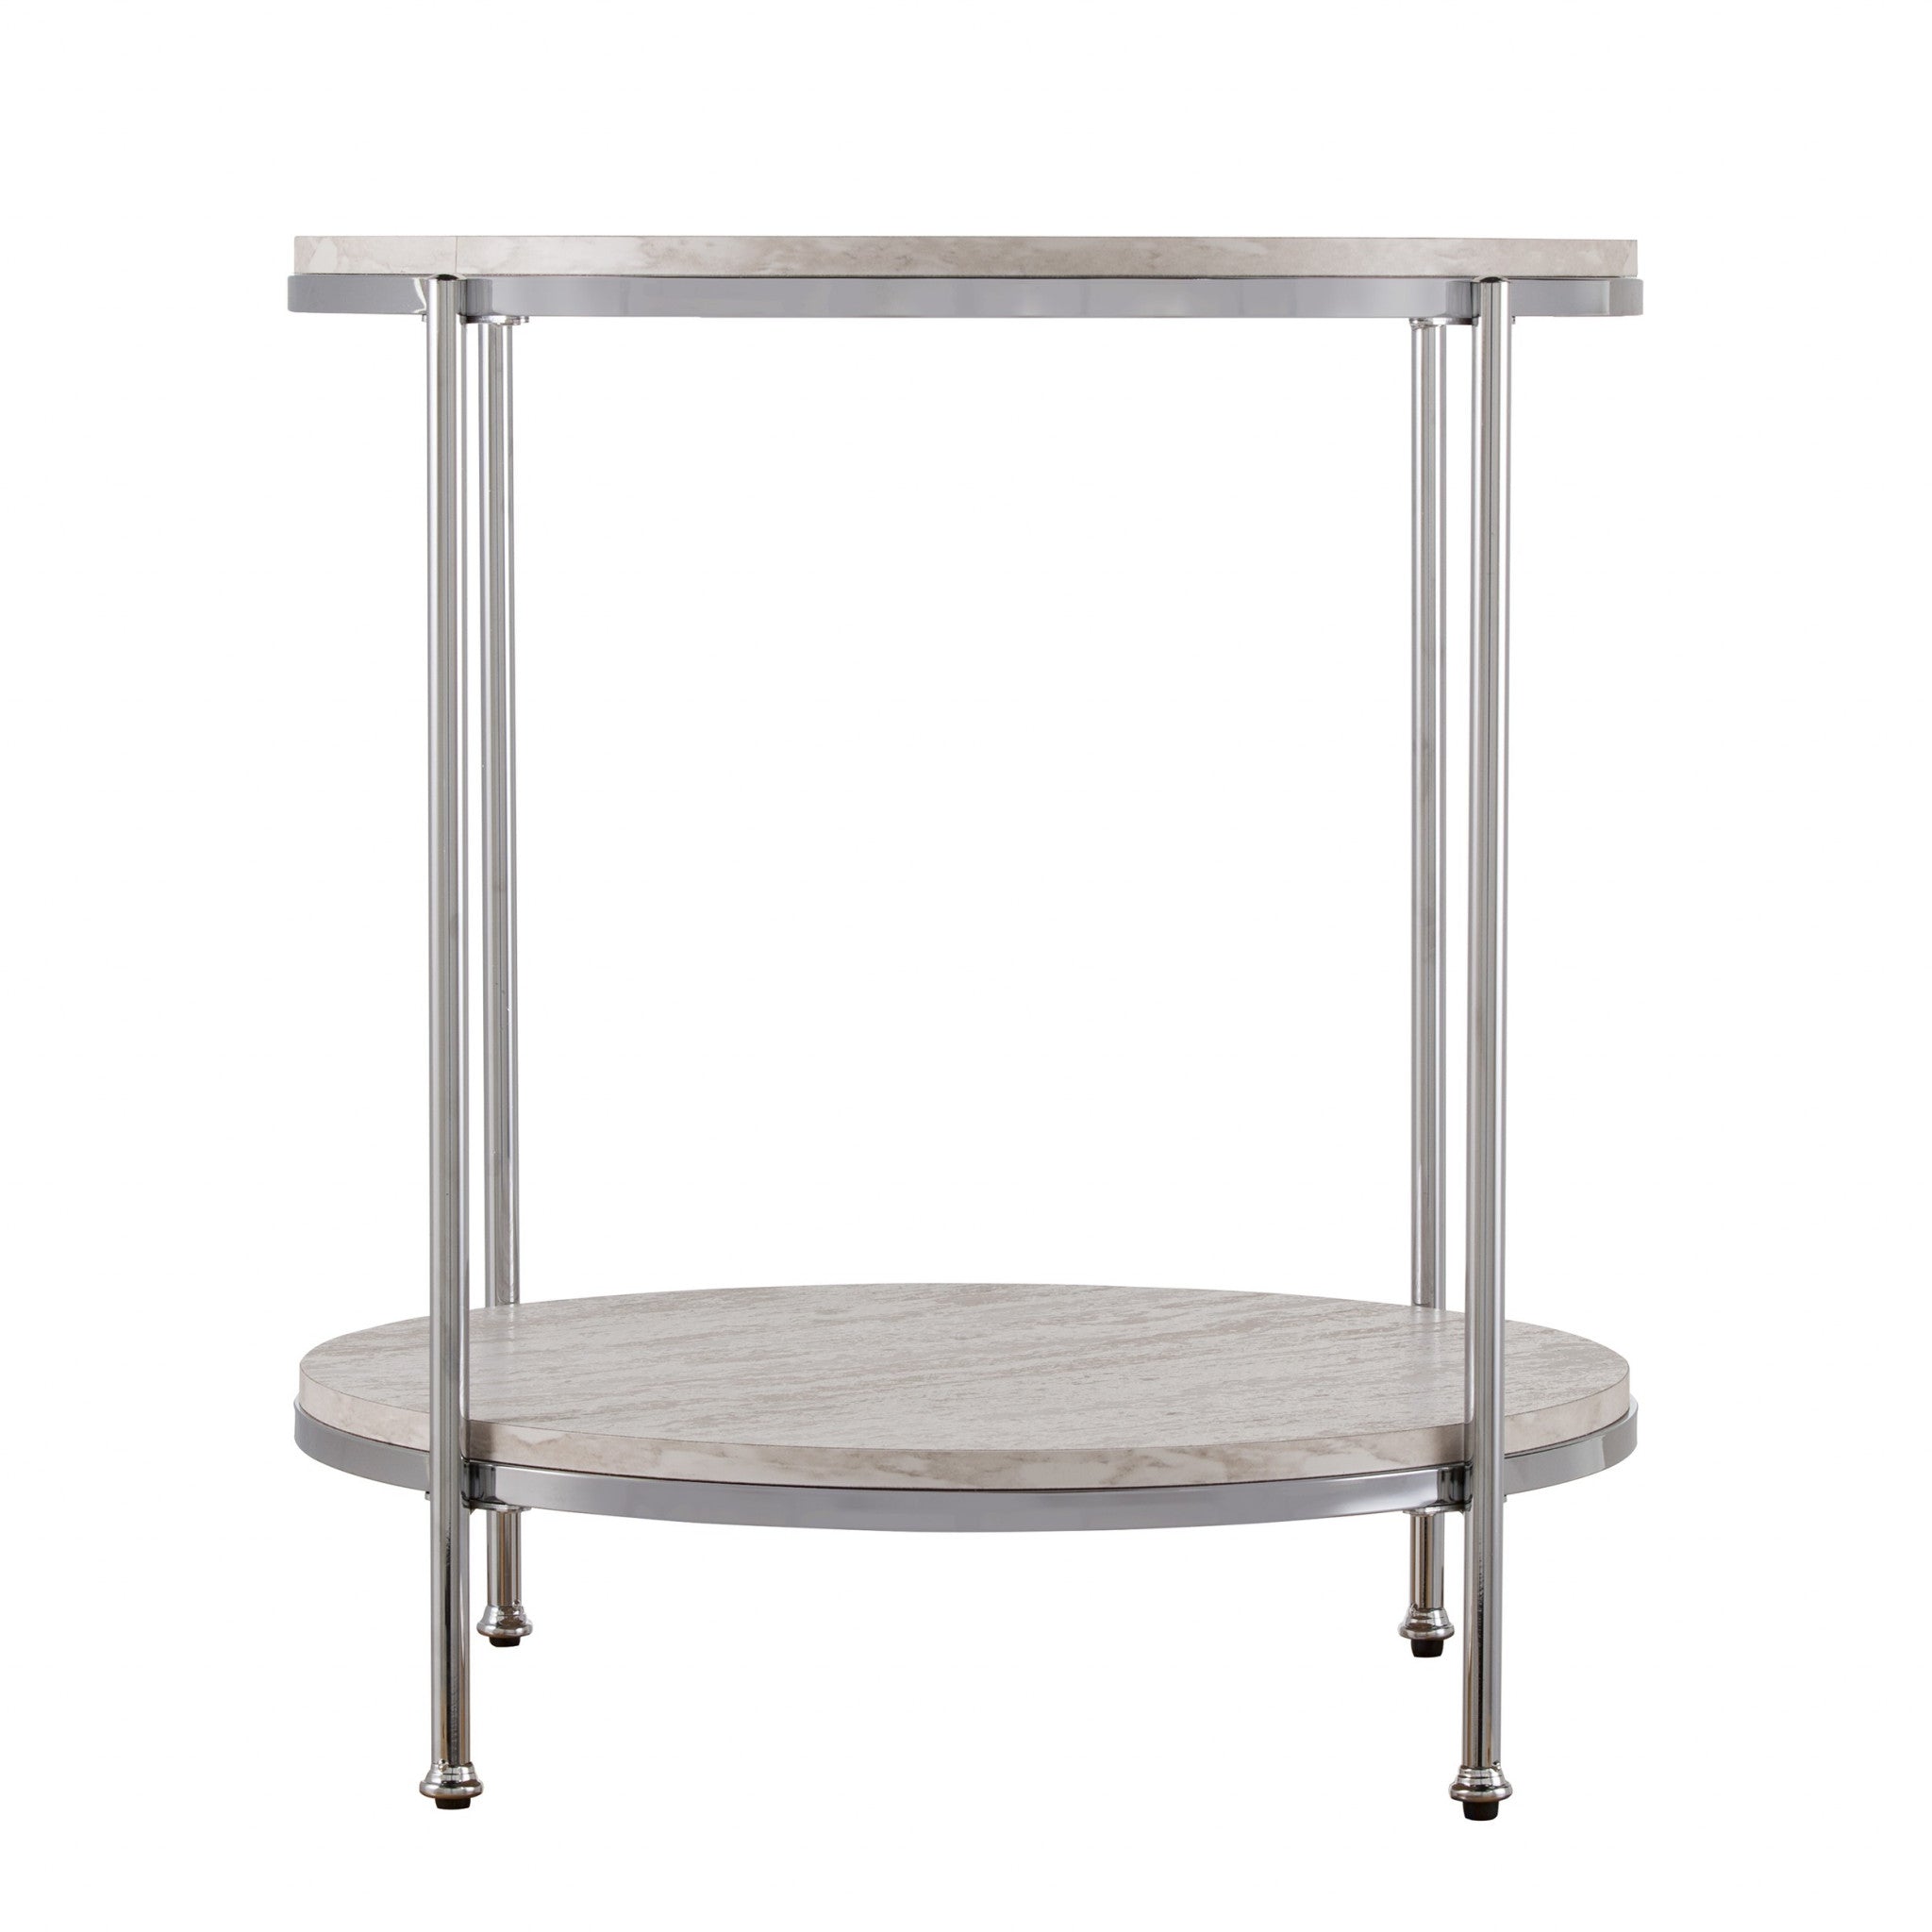 24" Chrome Manufactured Wood And Iron Rectangular End Table With Shelf